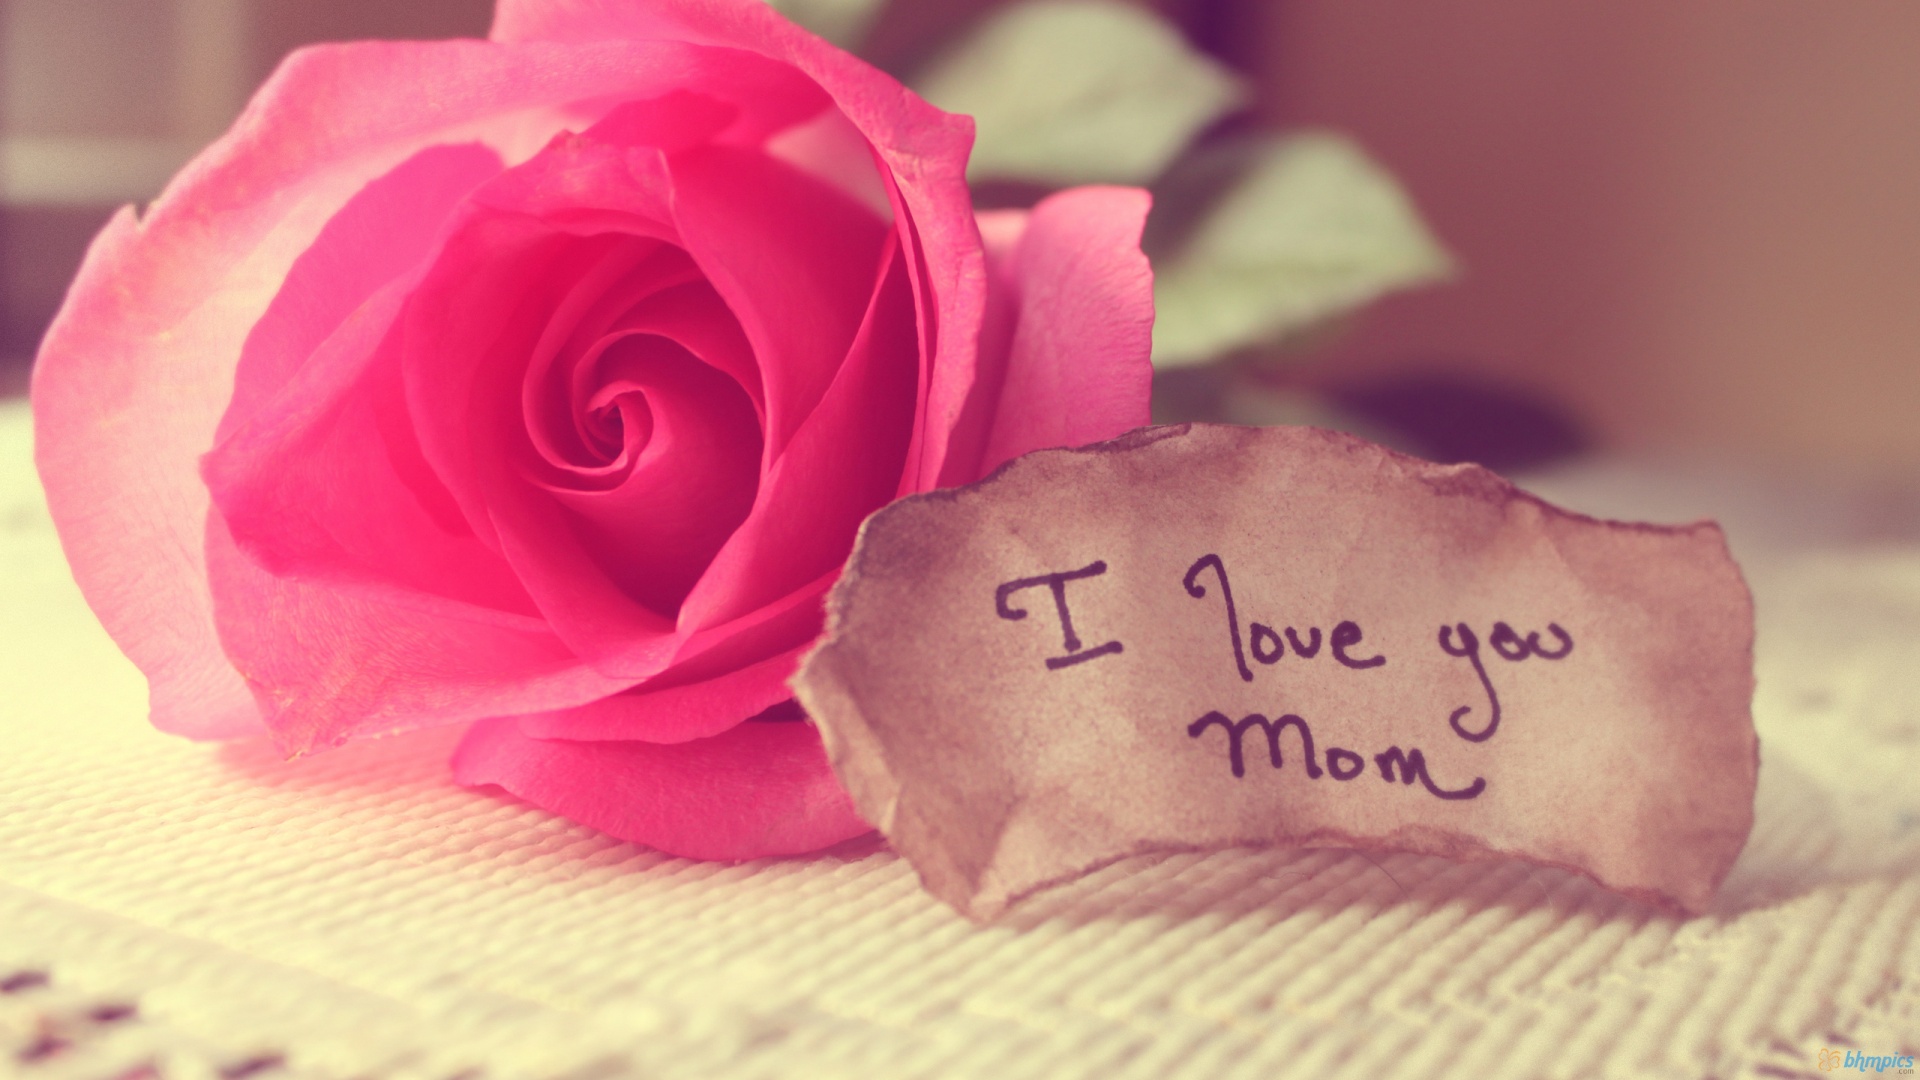 Mothers Day I Love You Mom Exclusive HD Wallpapers 3122 1920x1080